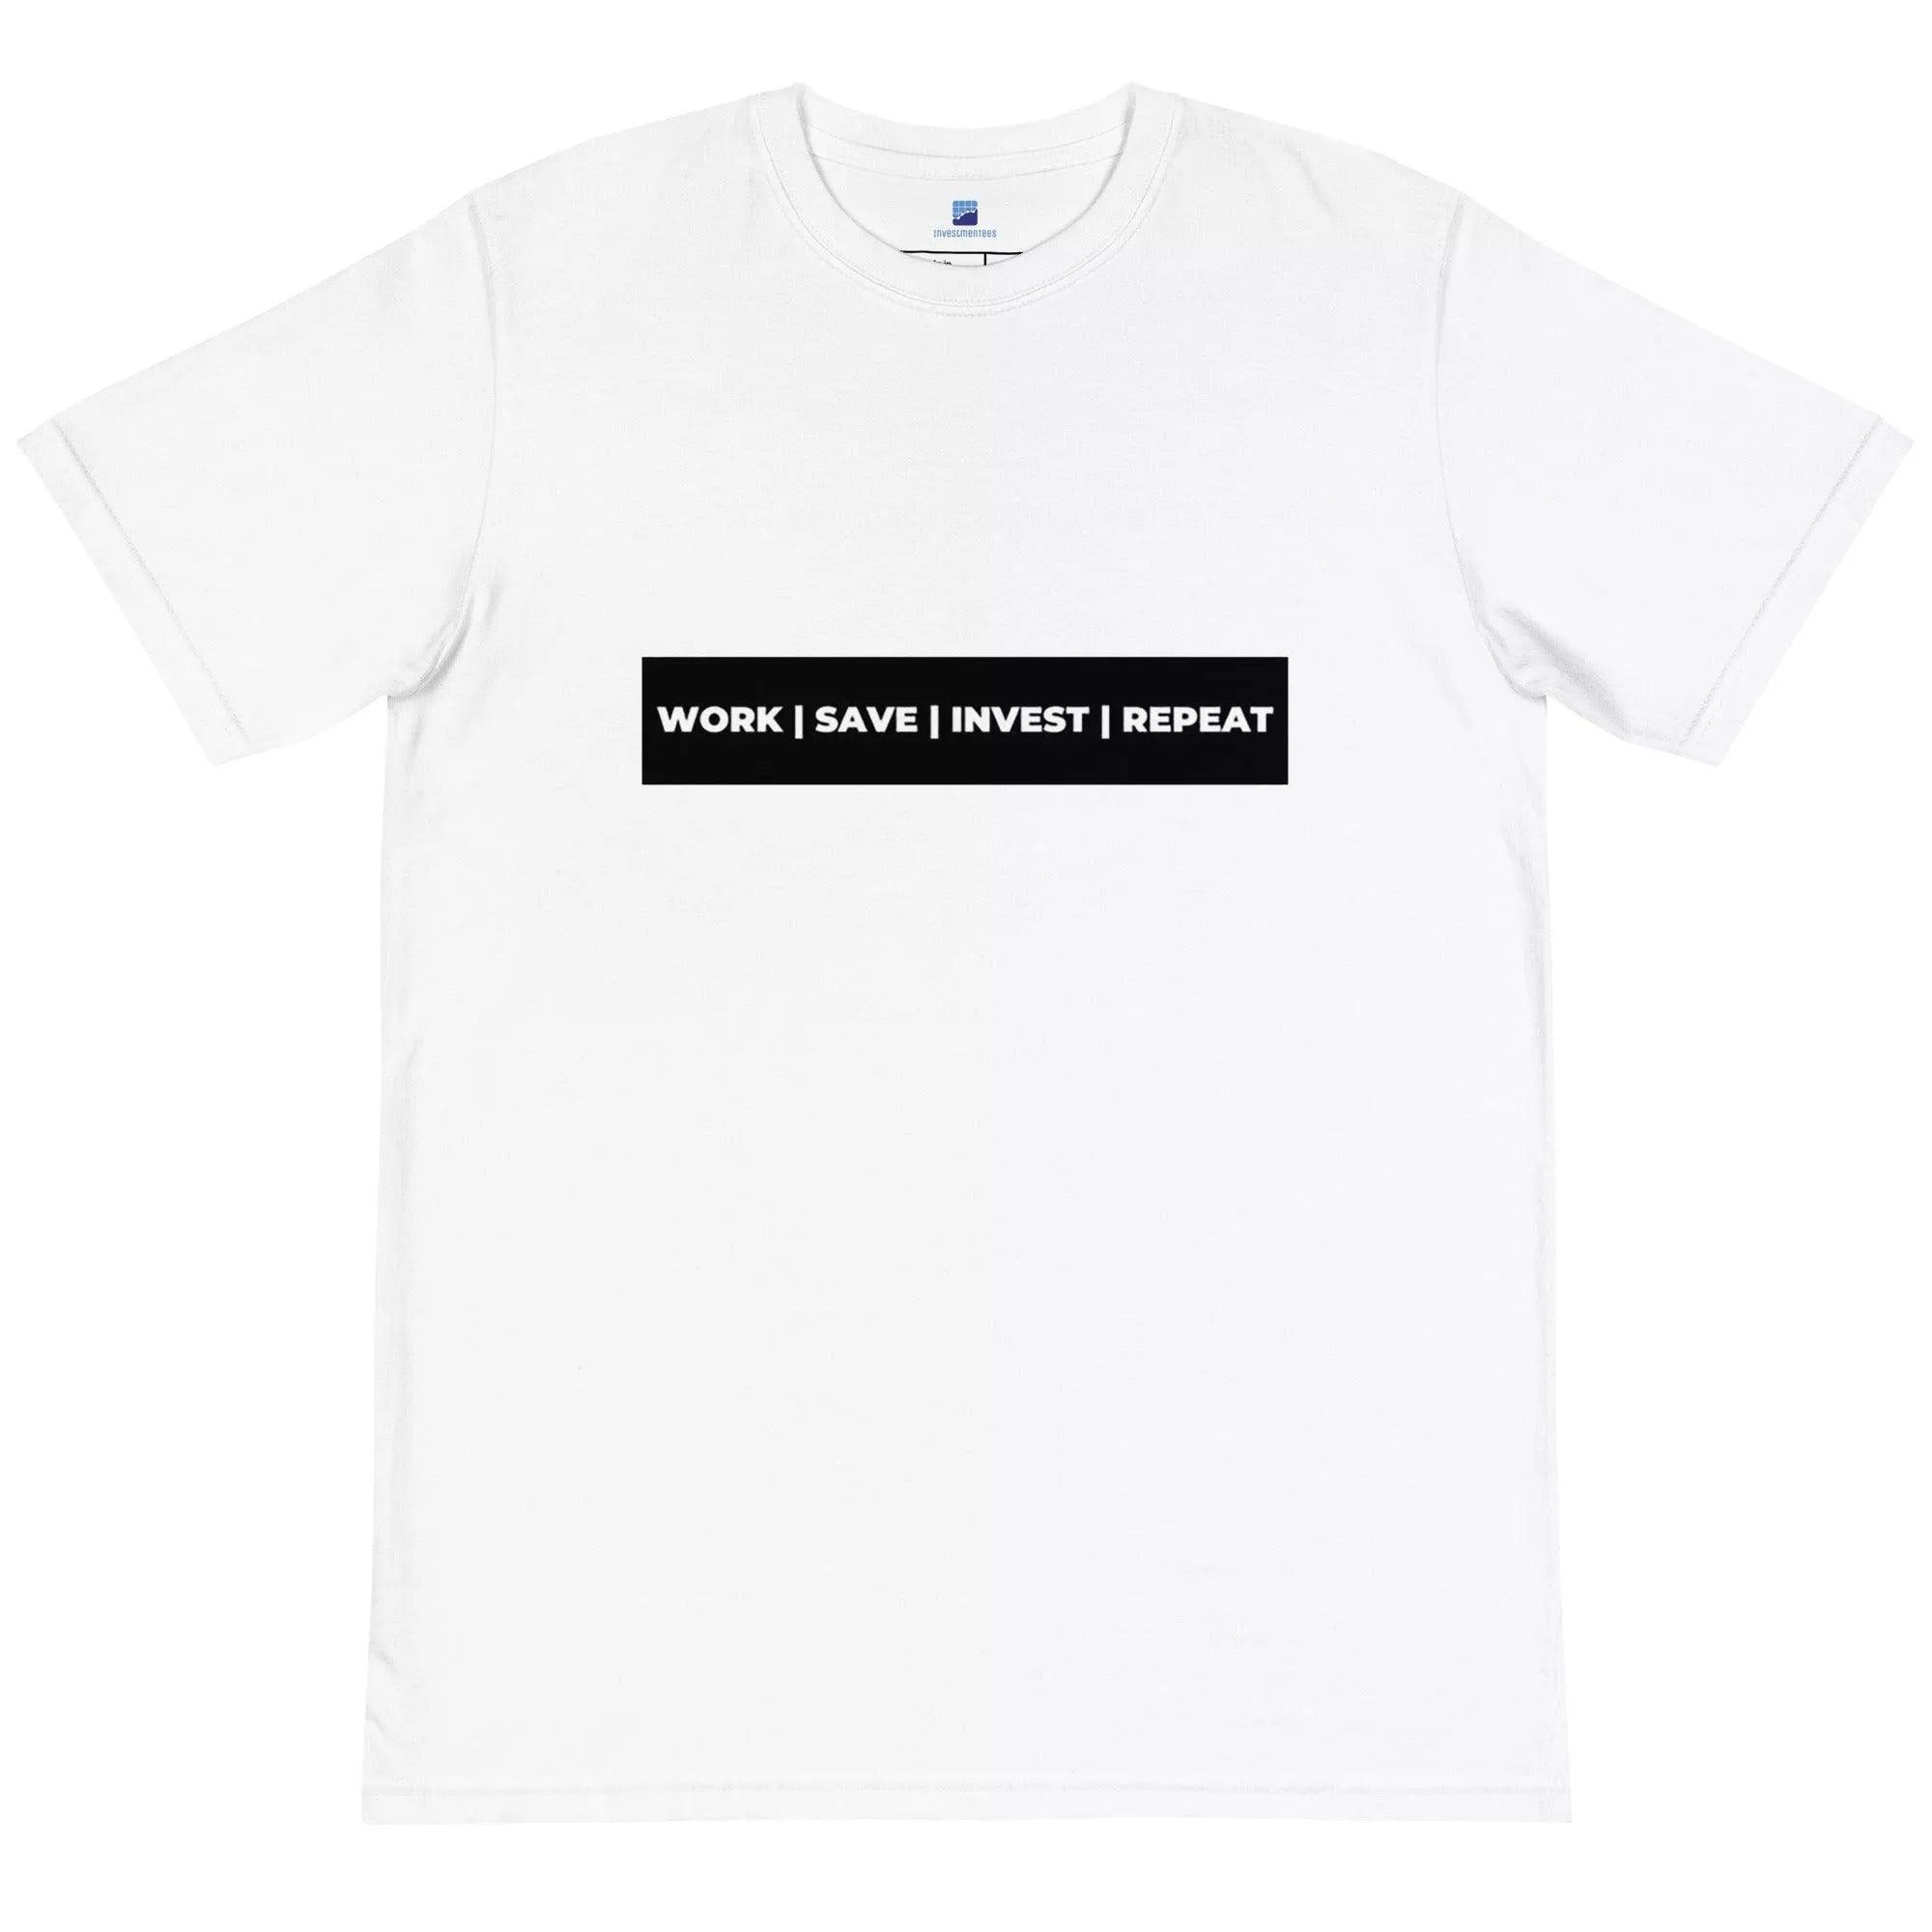 Work | Save | Invest | Money Grow T-Shirt - InvestmenTees